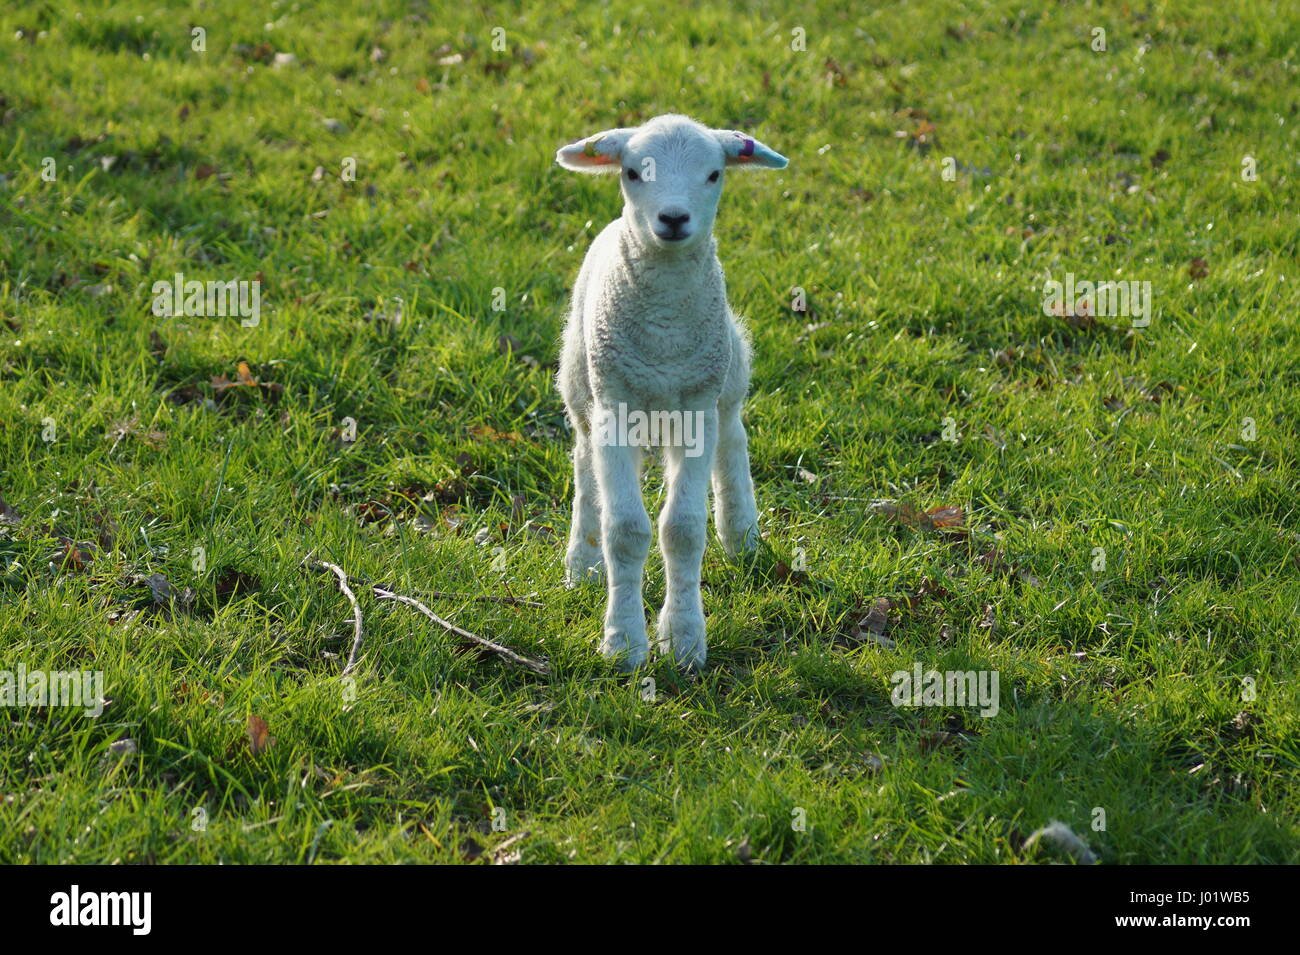 Lamb standing in a field looking at the camera Stock Photo